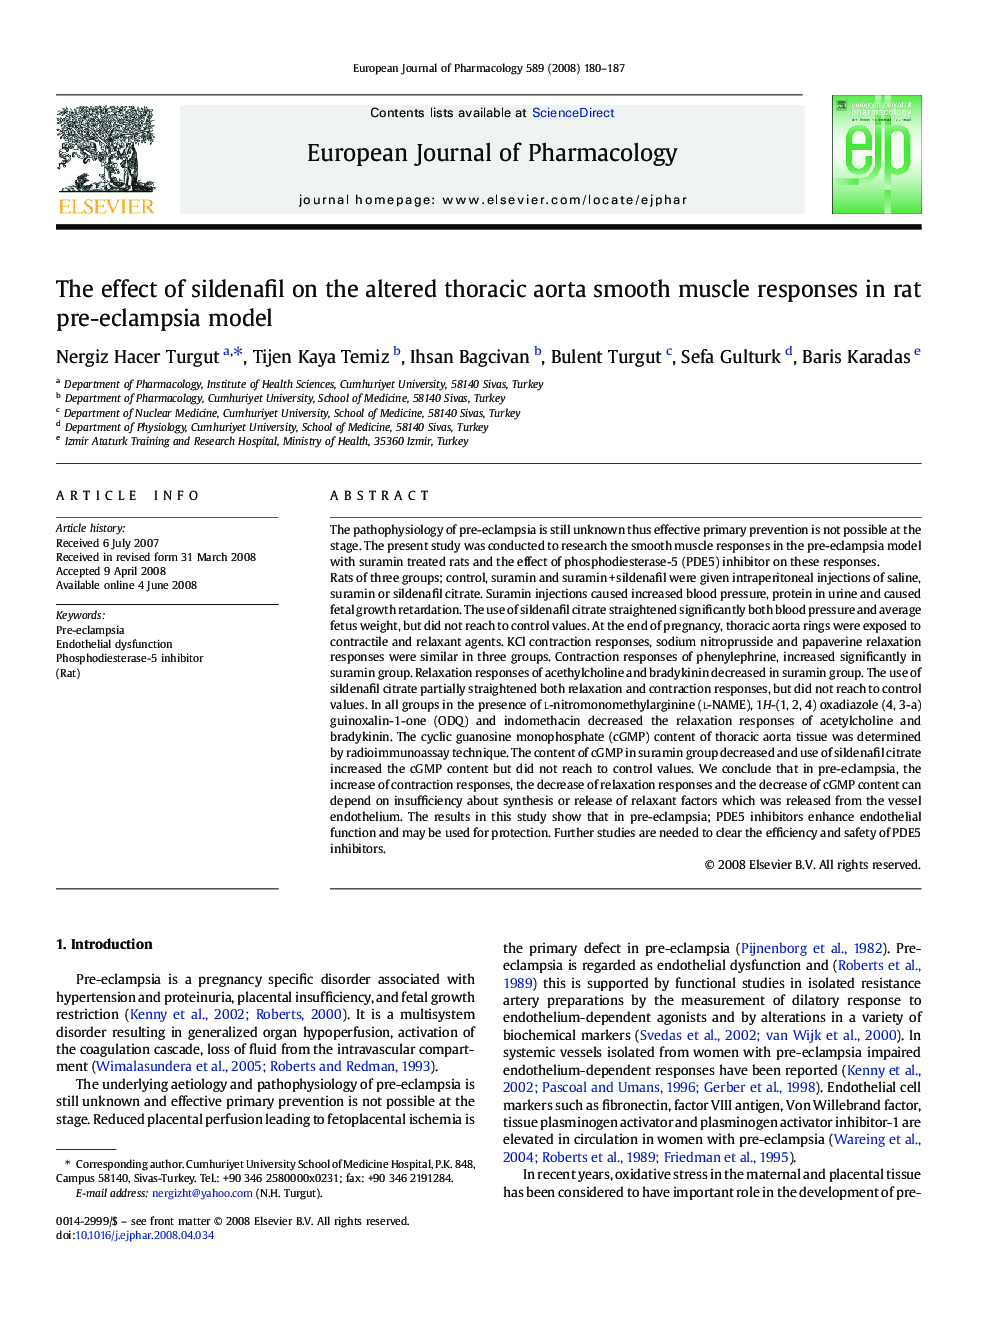 The effect of sildenafil on the altered thoracic aorta smooth muscle responses in rat pre-eclampsia model